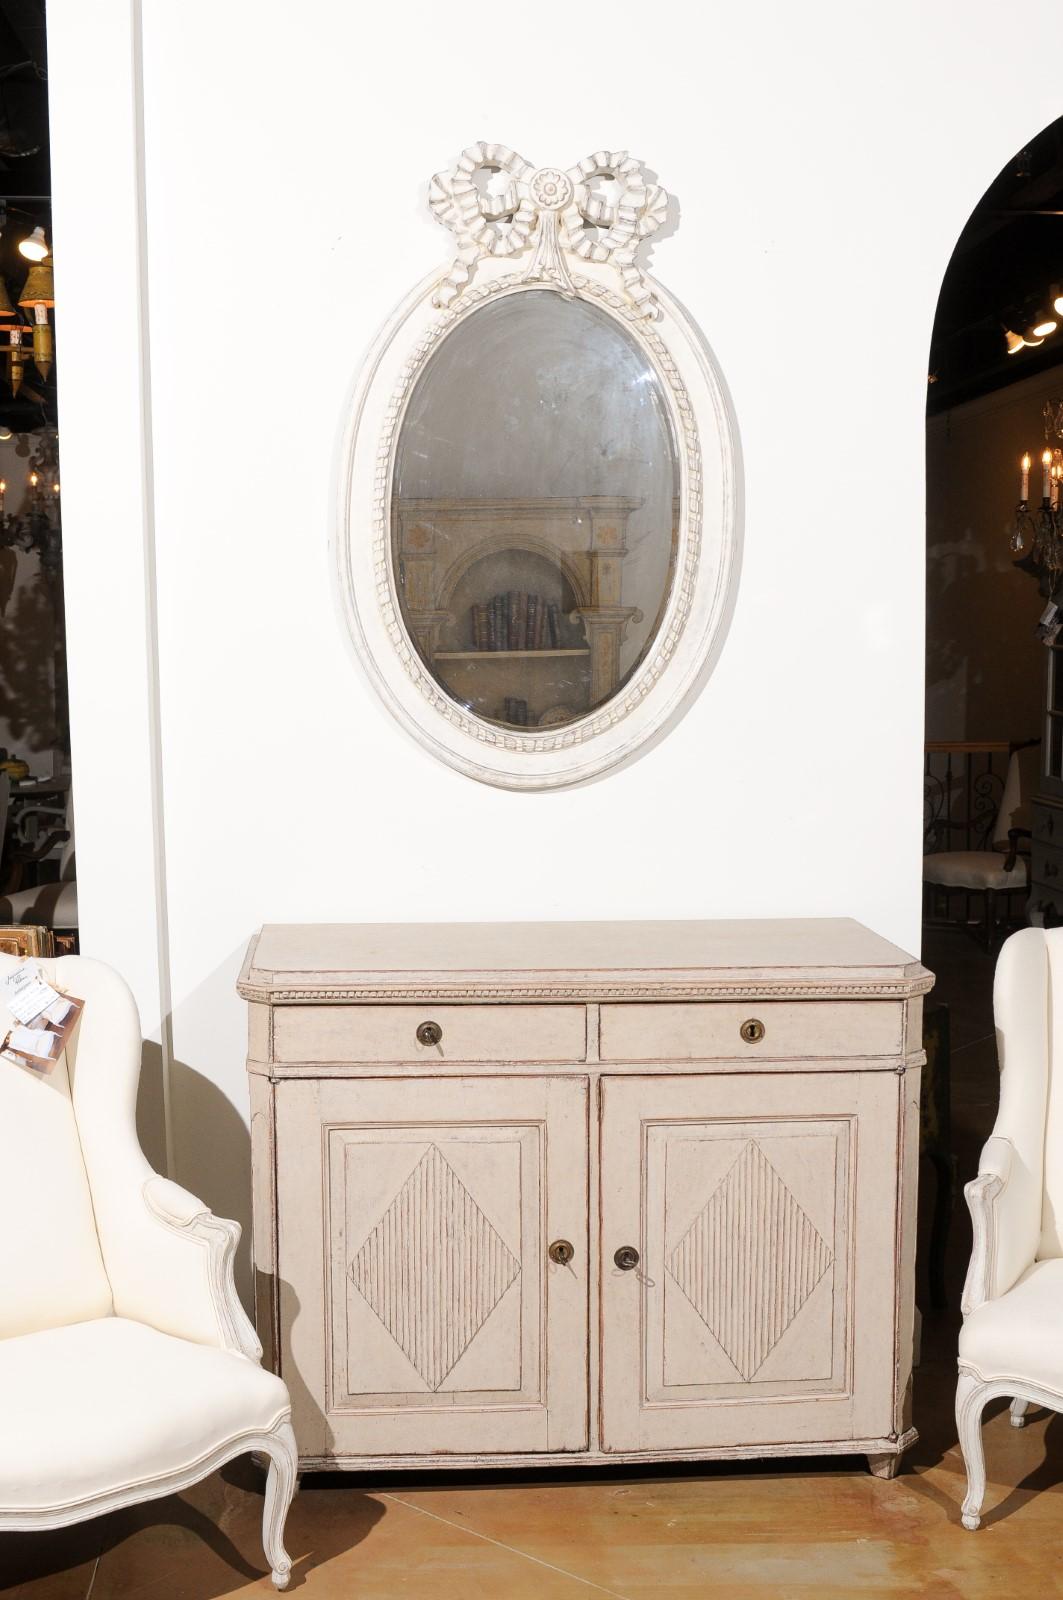 SOLD A Swedish Gustavian period painted buffet from the late 19th century, with canted side posts, diamond motifs and dentil molding. Created in Sweden during the last quarter of the 19th century, this painted buffet features a slightly raised top